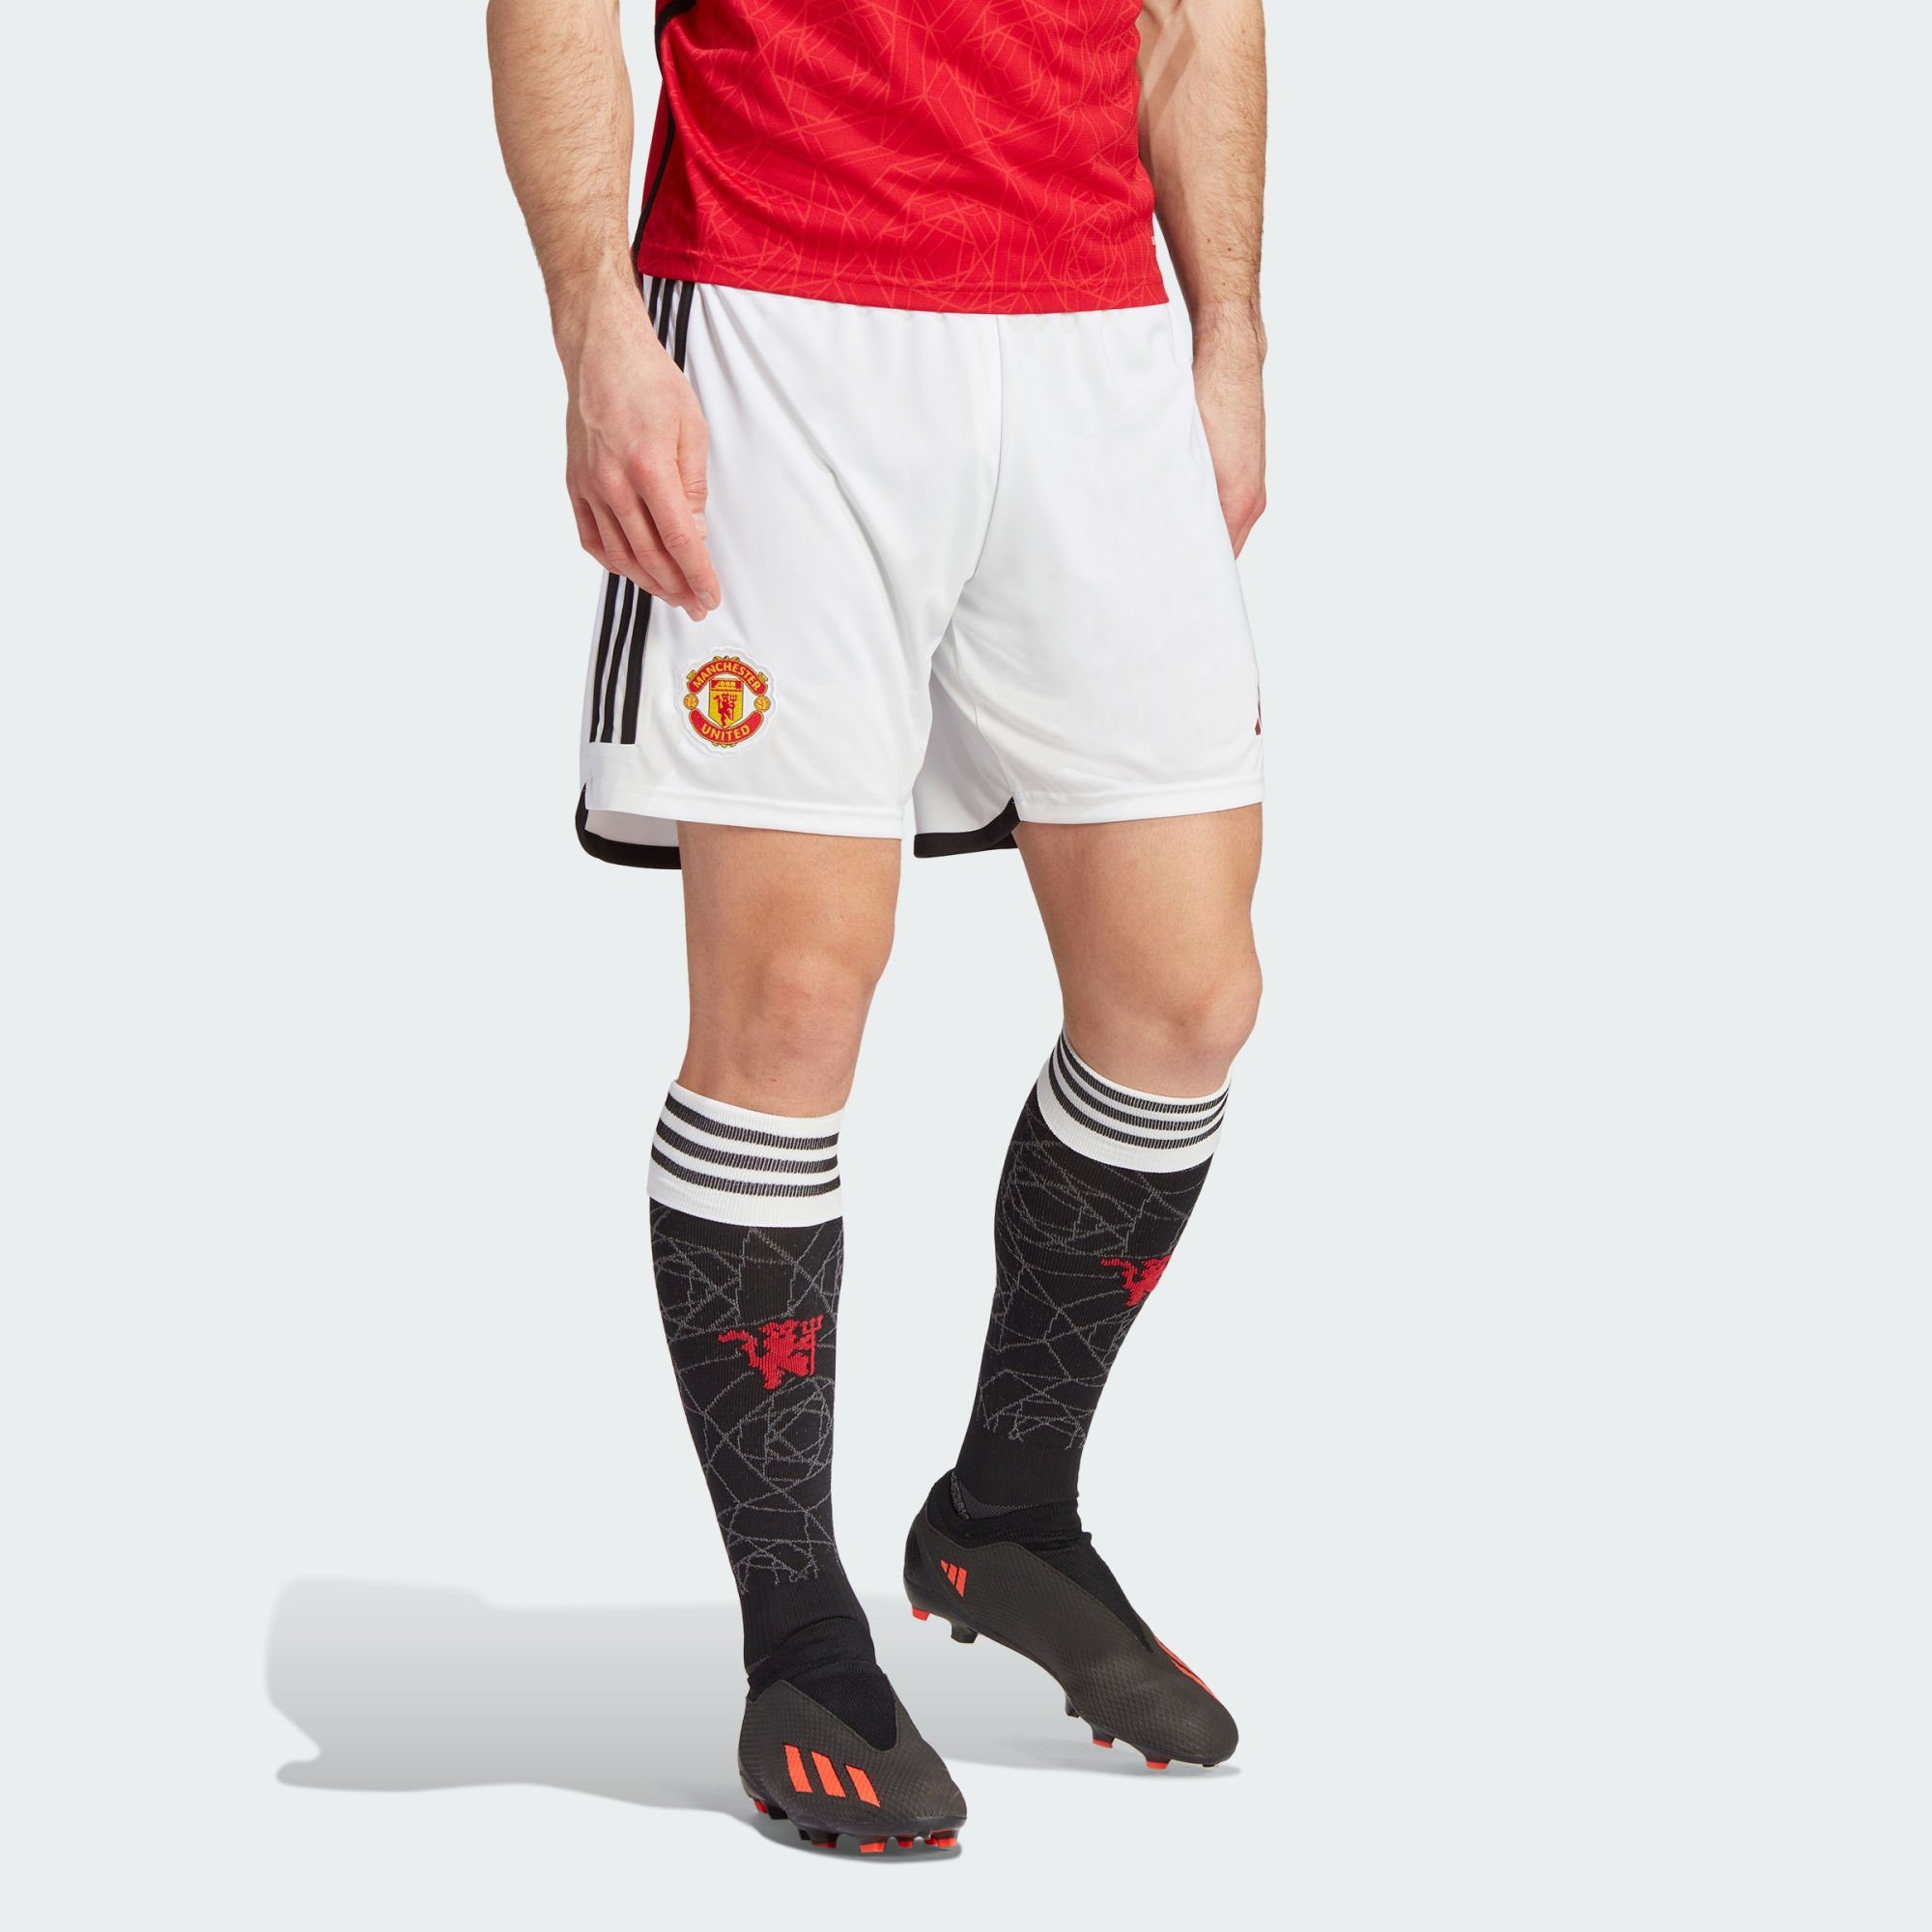 adidas Performance Funktionsshorts MANCHESTER UNITED 23/24 HEIMSHORTS weiss